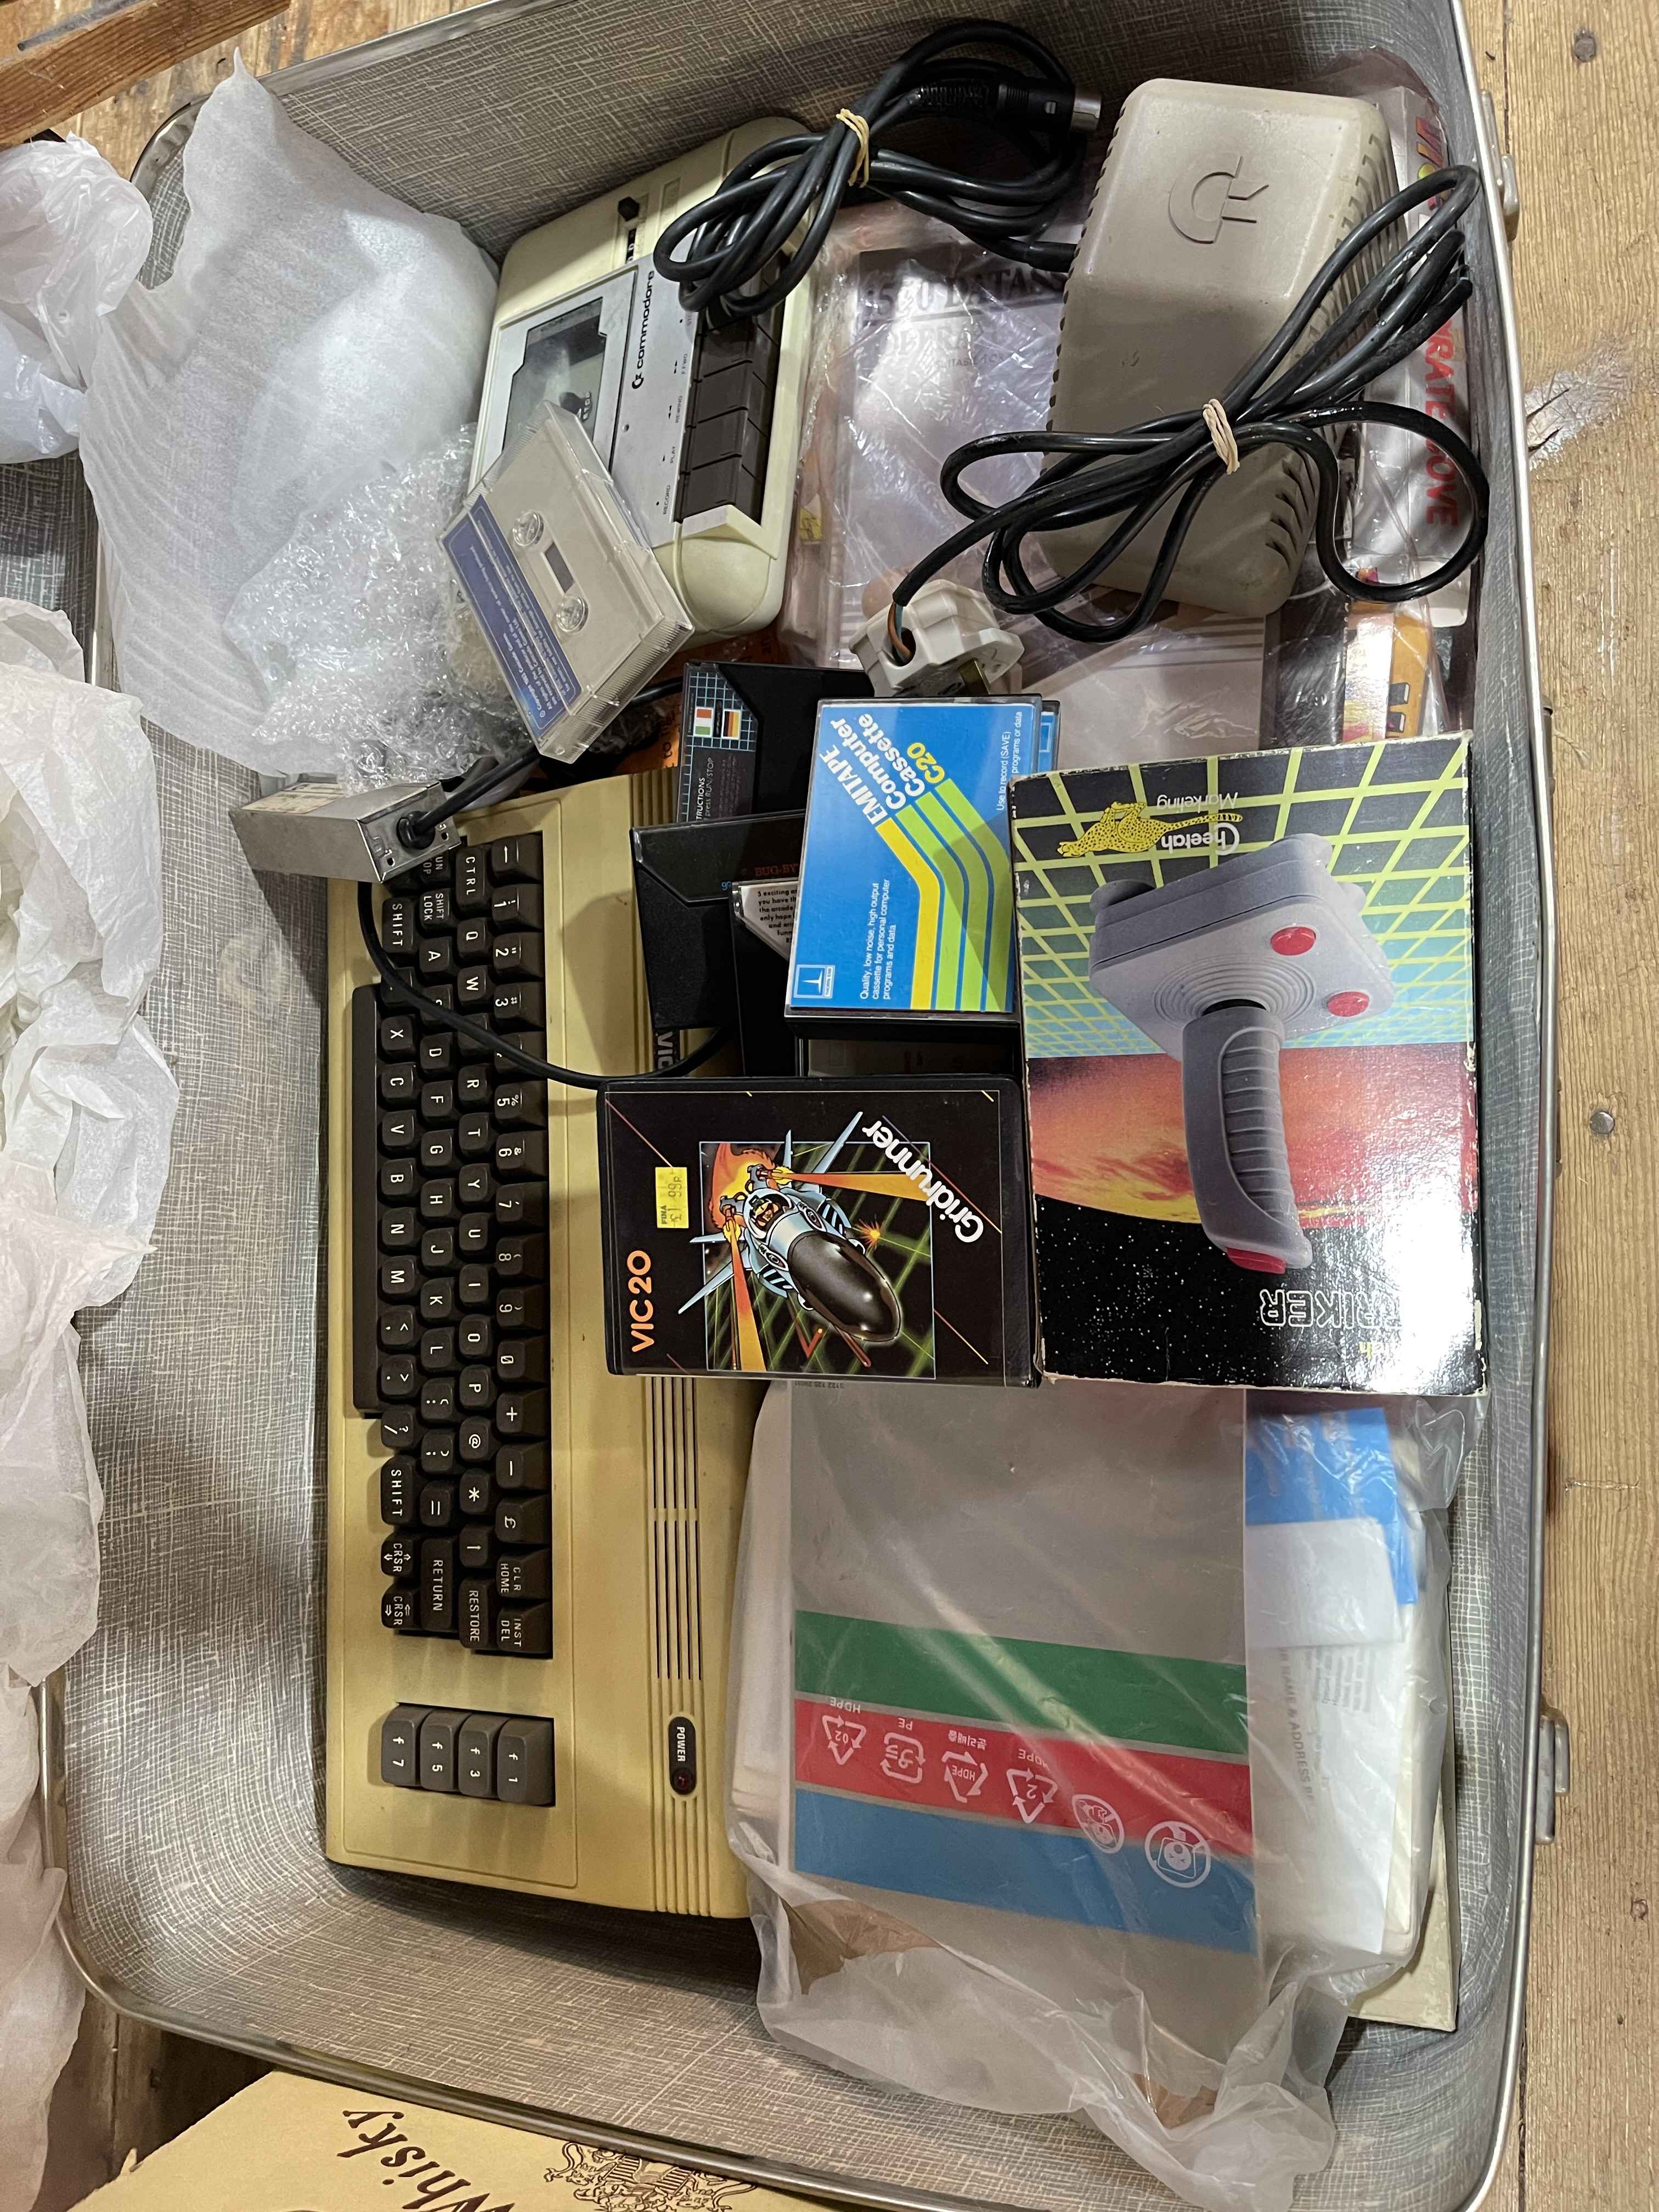 Commodore Vic 20 early computer, games, etc.